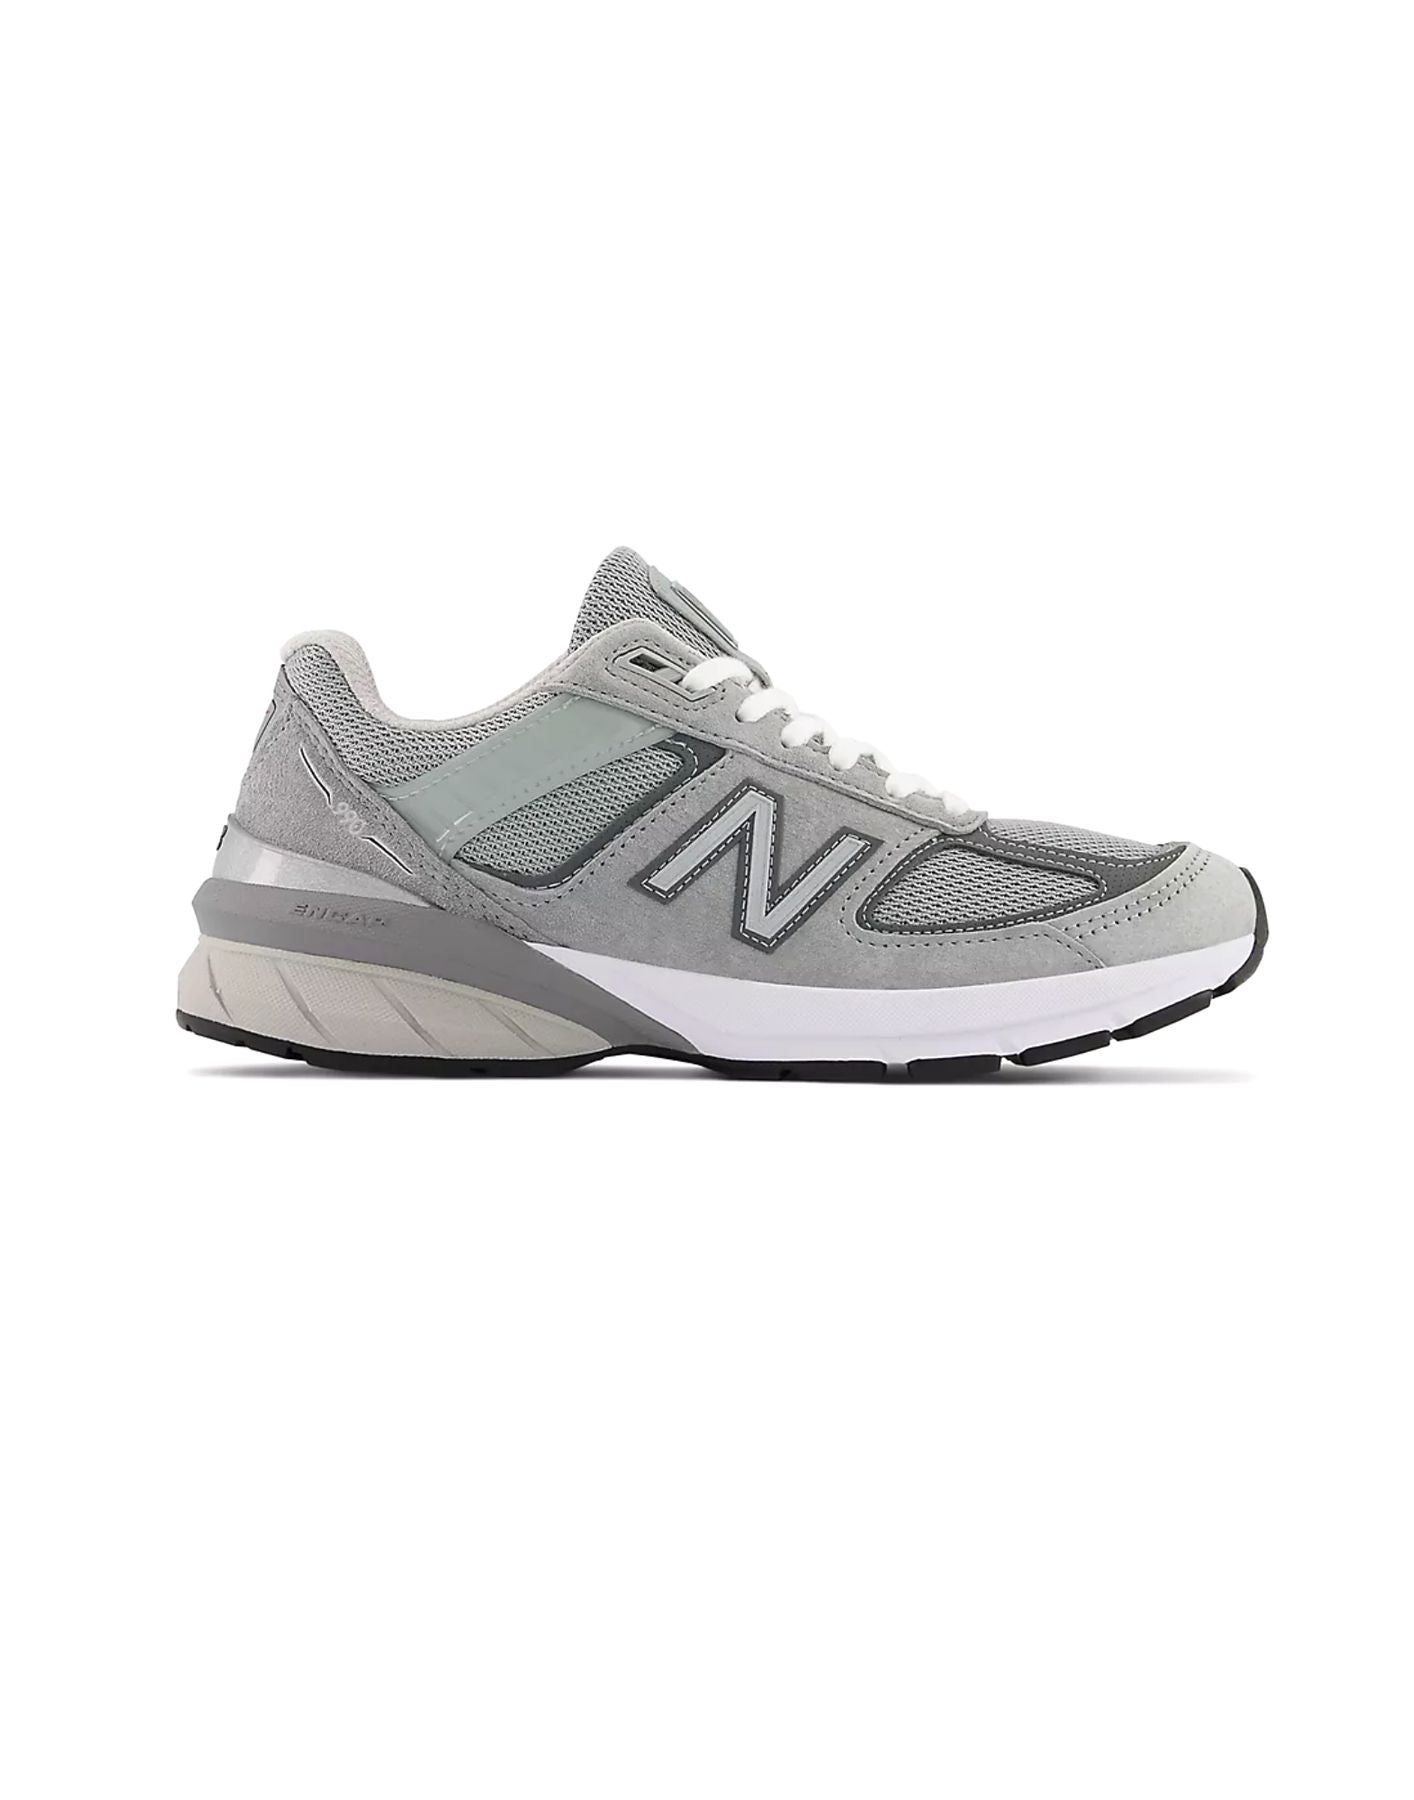 Shoes for woman W990GL5 NEW BALANCE